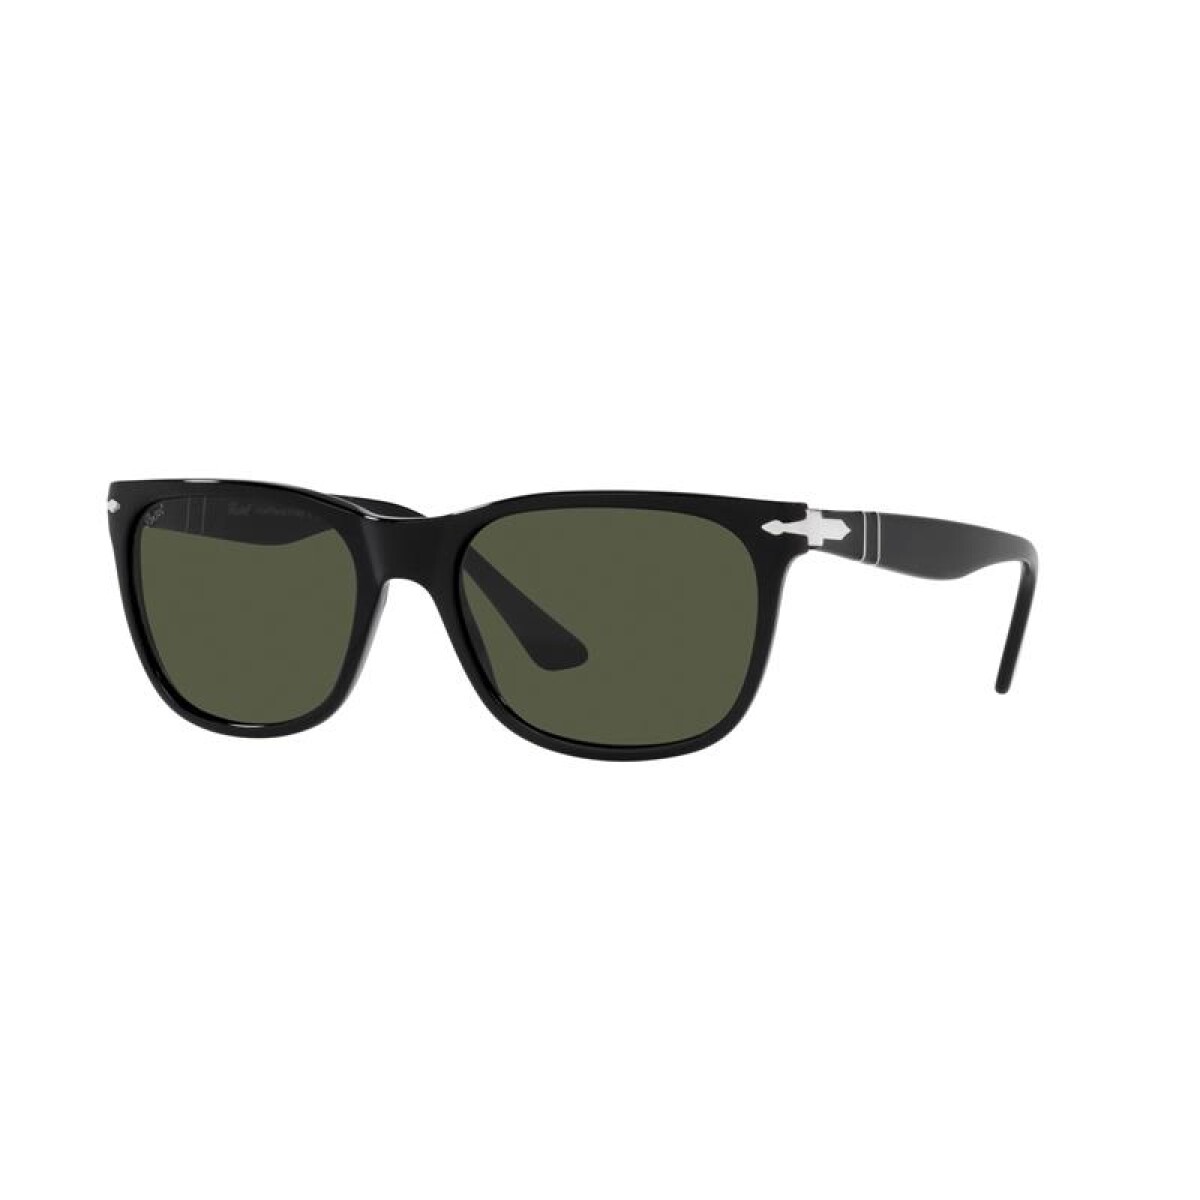 Persol 3291-s - 95/31 